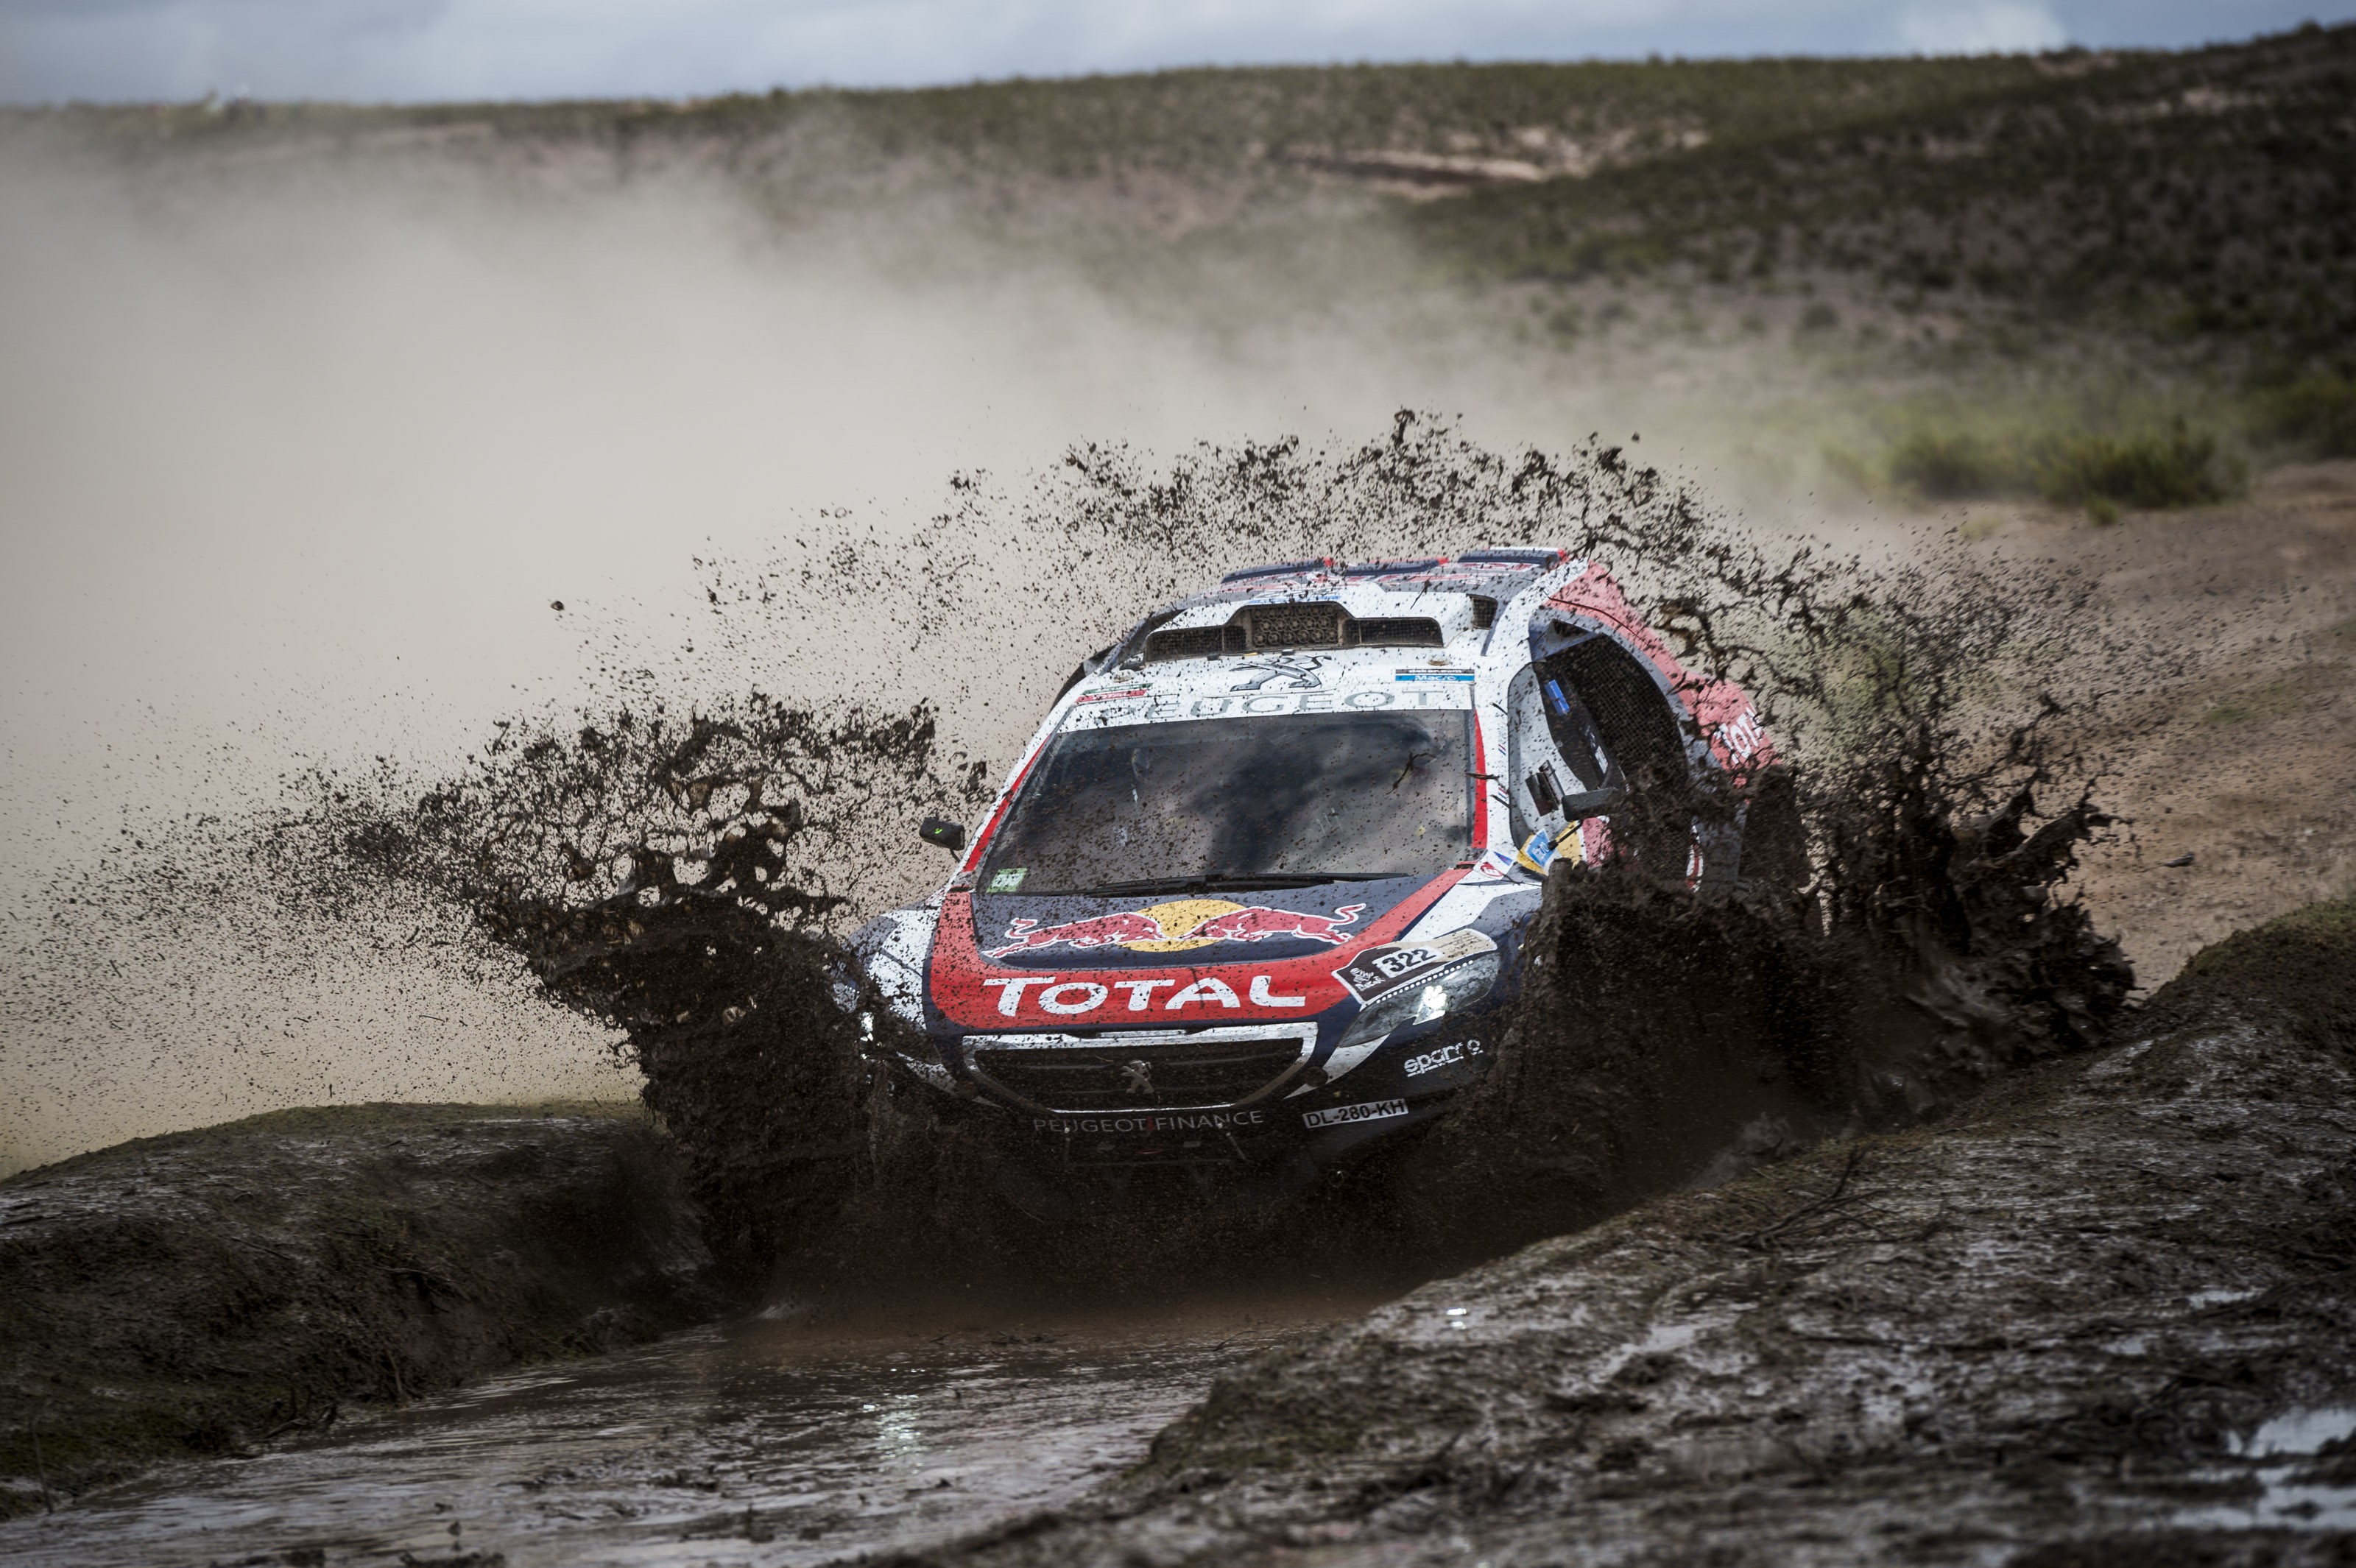 Cyril Despres races during the 7th stage of Rally Dakar 2015 from Iquique, Chile to Uyuni, Bolivia on January 10th, 2015